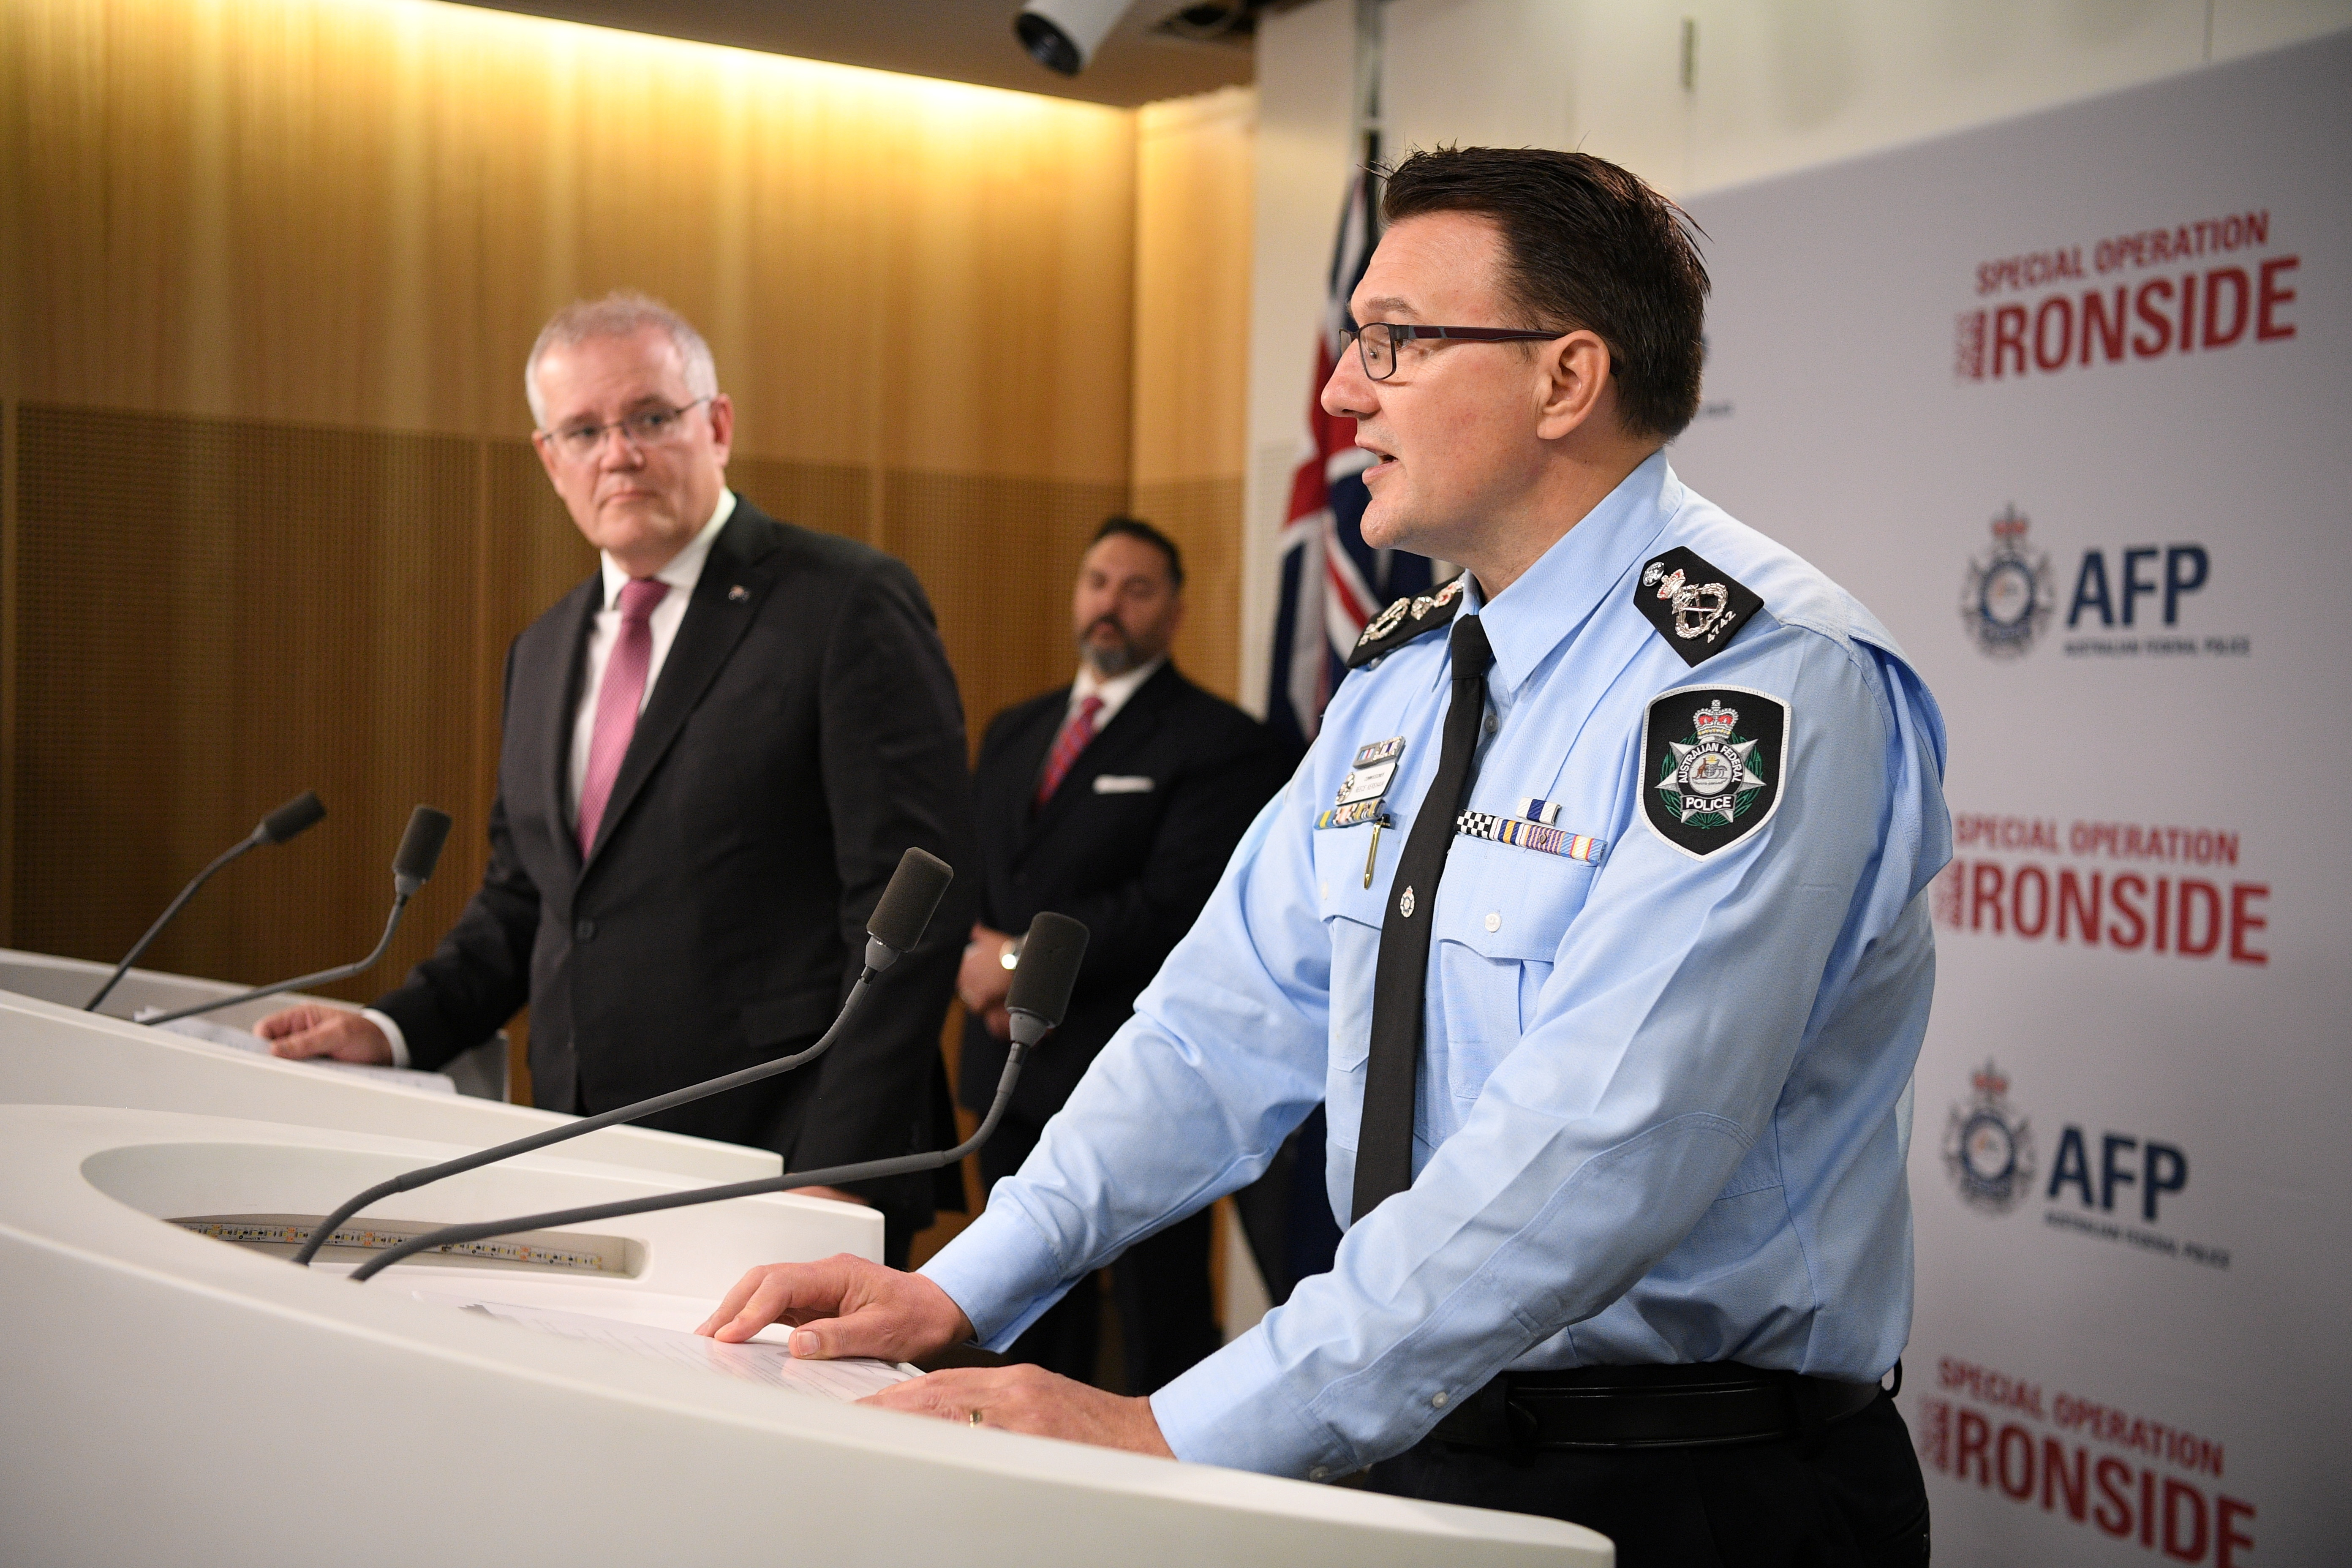 AFP Commissioner Reece Kershaw speaks about Operation Ironside in Sydney